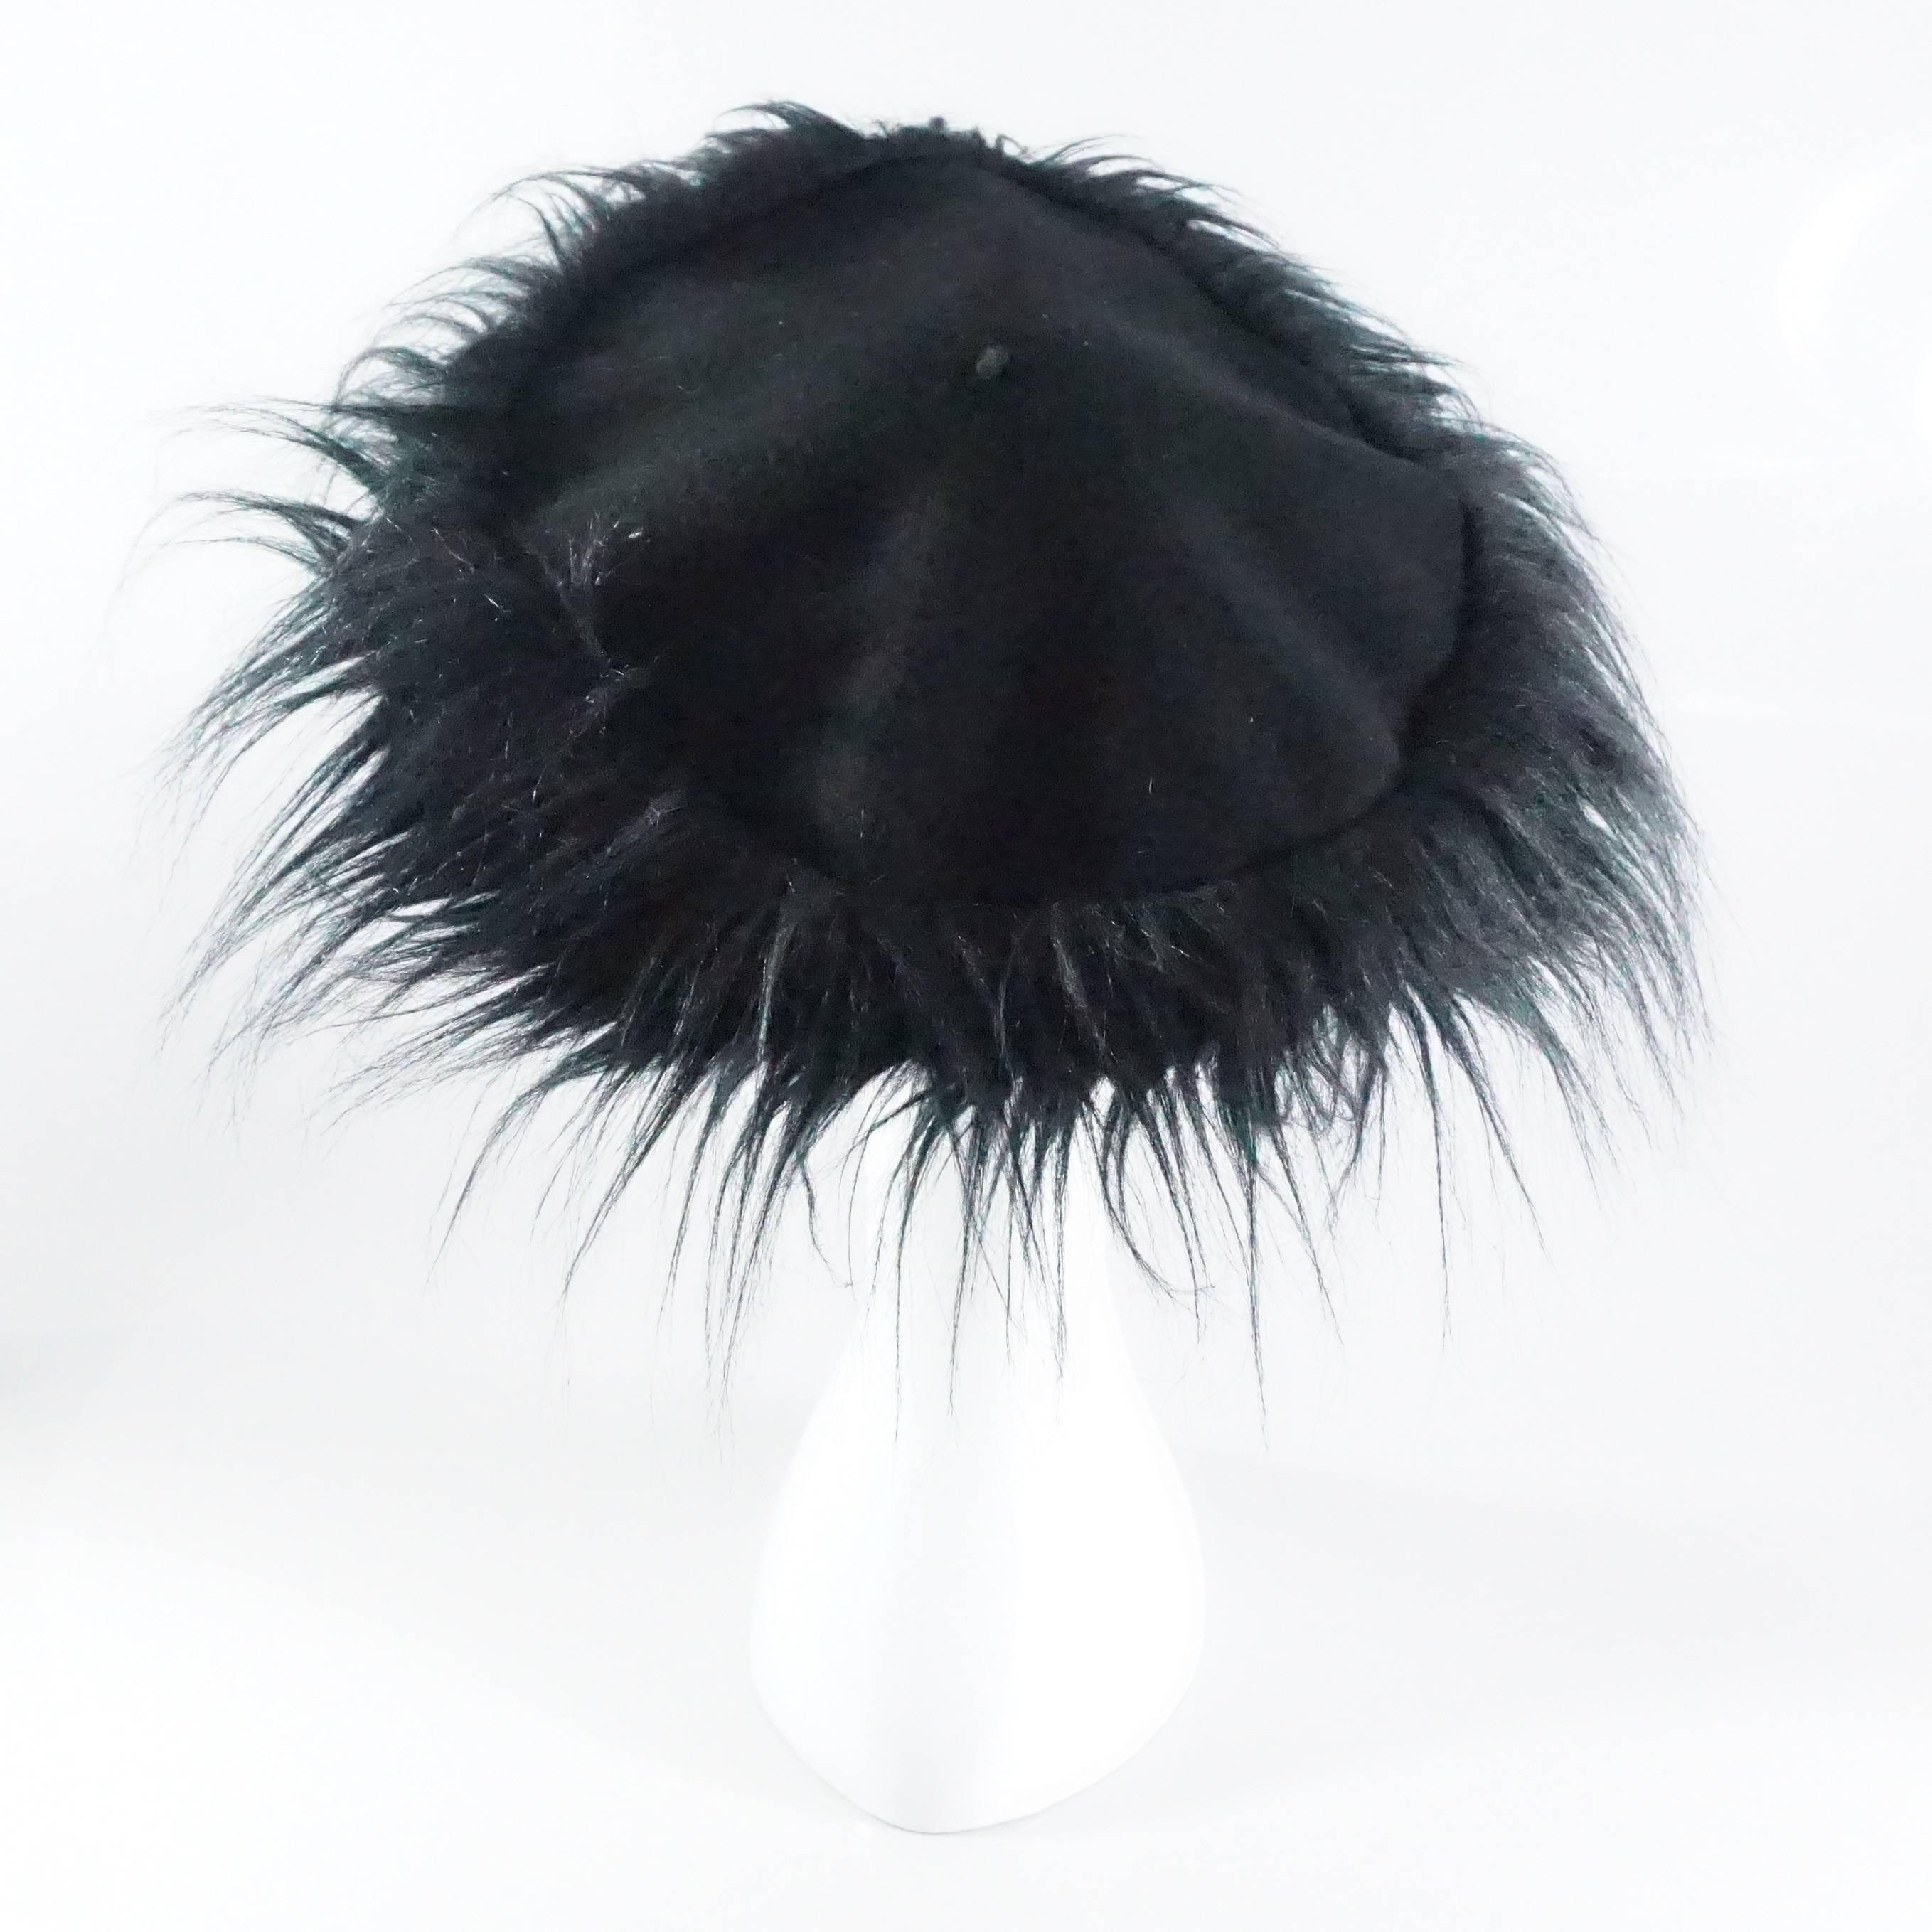 This Chanel beret is made of black wool with a faux fur trim. It is a size 56.This beret is in excellent condition with light wear to the wool. 

Measurements
Hat: 11.25” x 12”
Trim: 4.5”
Circumference: 18.5” – 22.5” 
